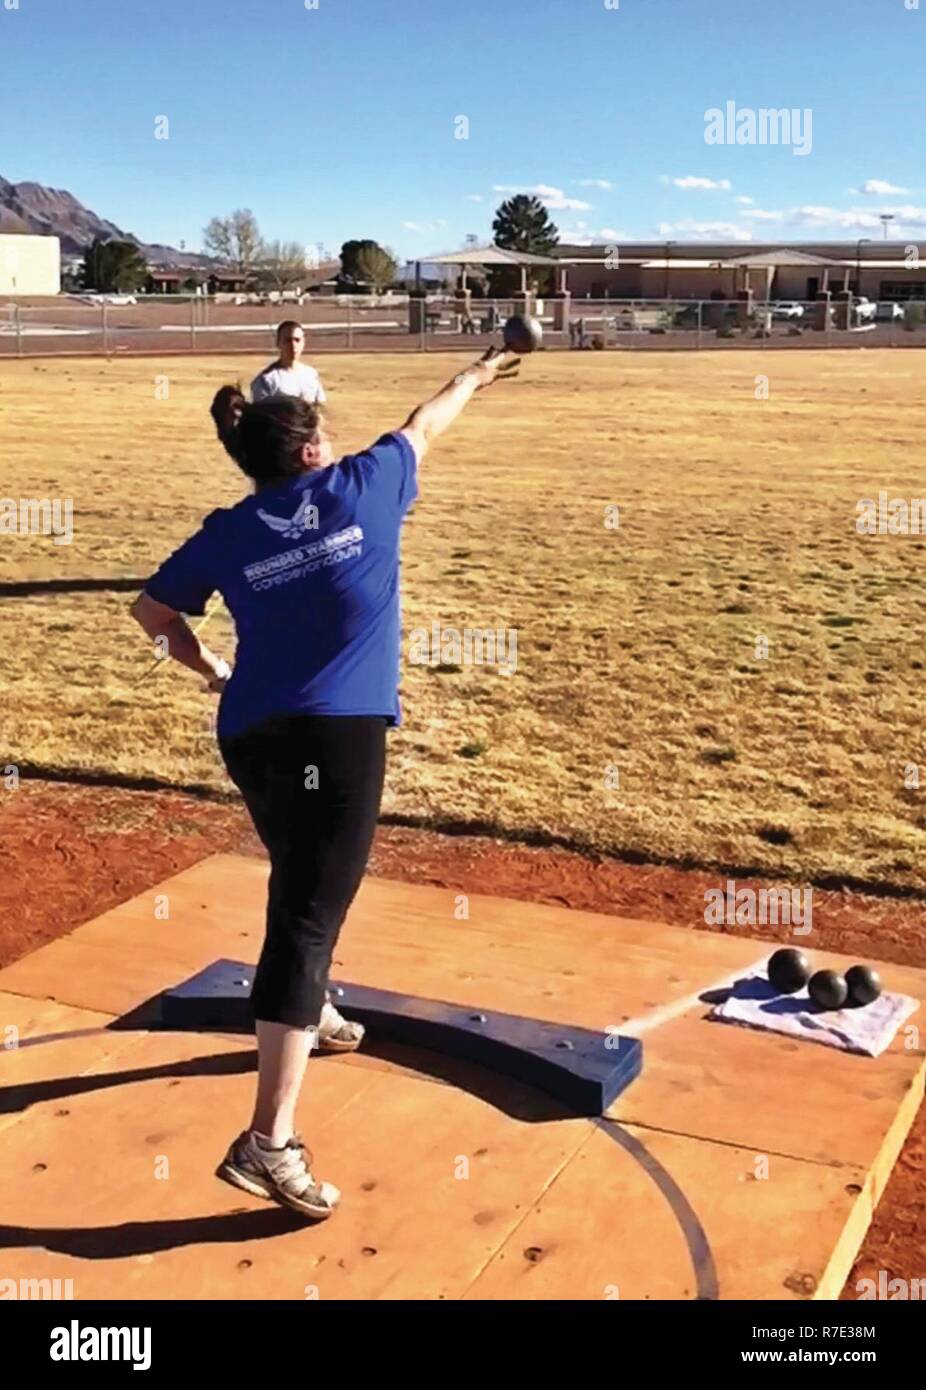 Lt Col Jackie Burns, 552d Air Control Group, 552d Air Control Wing, competes in the shot put event at the Wounded Warrior Trials held February 17, 2017 at Nellis Air Force Base, Nevada.  Burns earned three Silver Medals and one Bronze Medal and was selected to the primary Air Force team that will compete in the Warrior Games in Chicago June 30 - July 8, 2017.    (Air Force Stock Photo